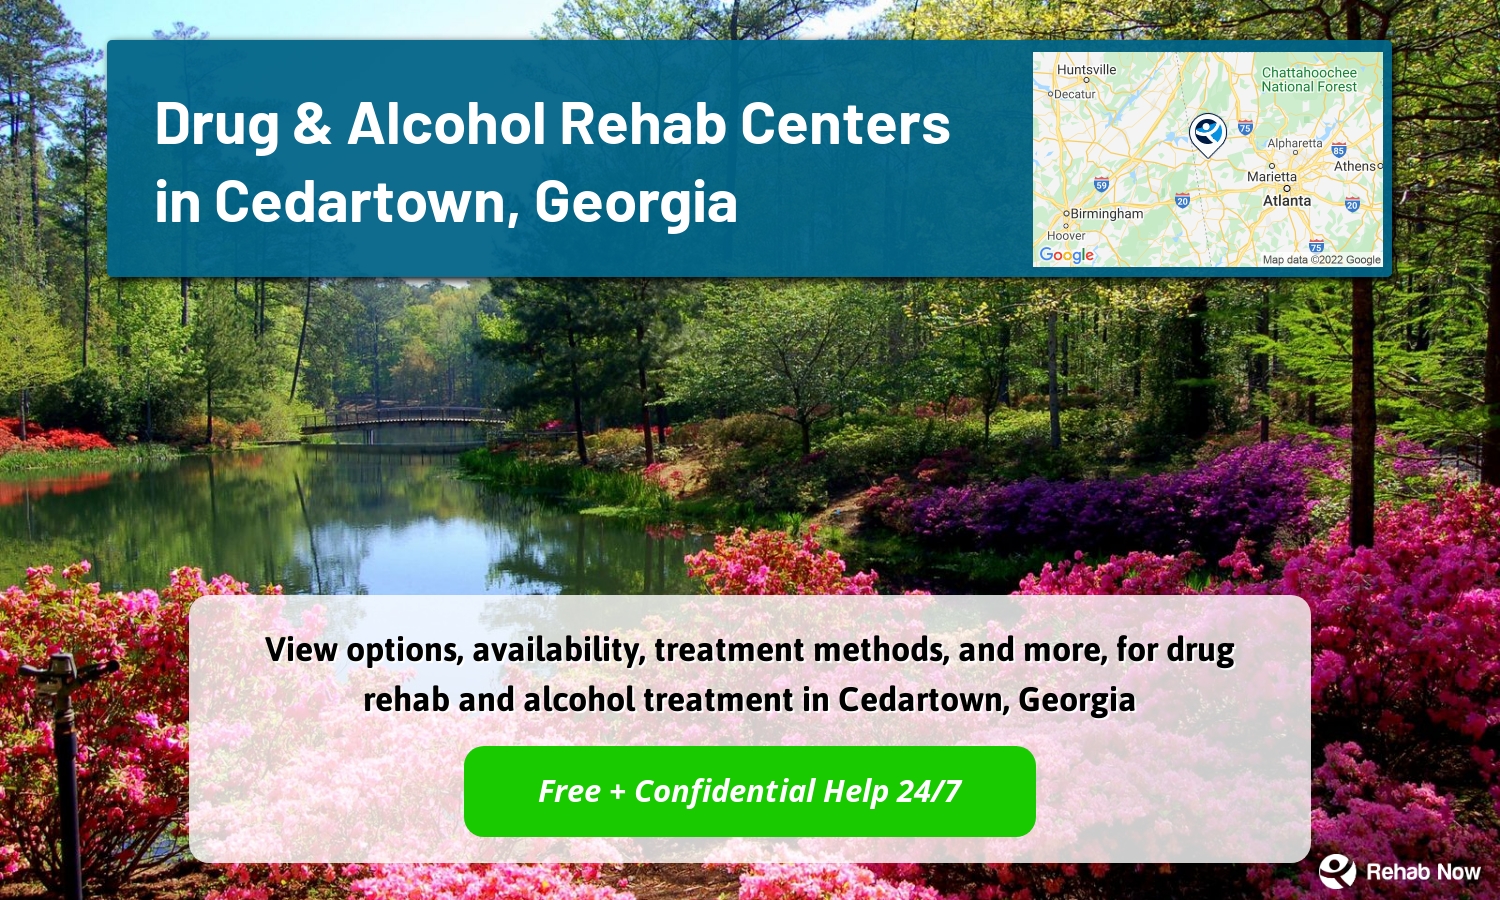 View options, availability, treatment methods, and more, for drug rehab and alcohol treatment in Cedartown, Georgia